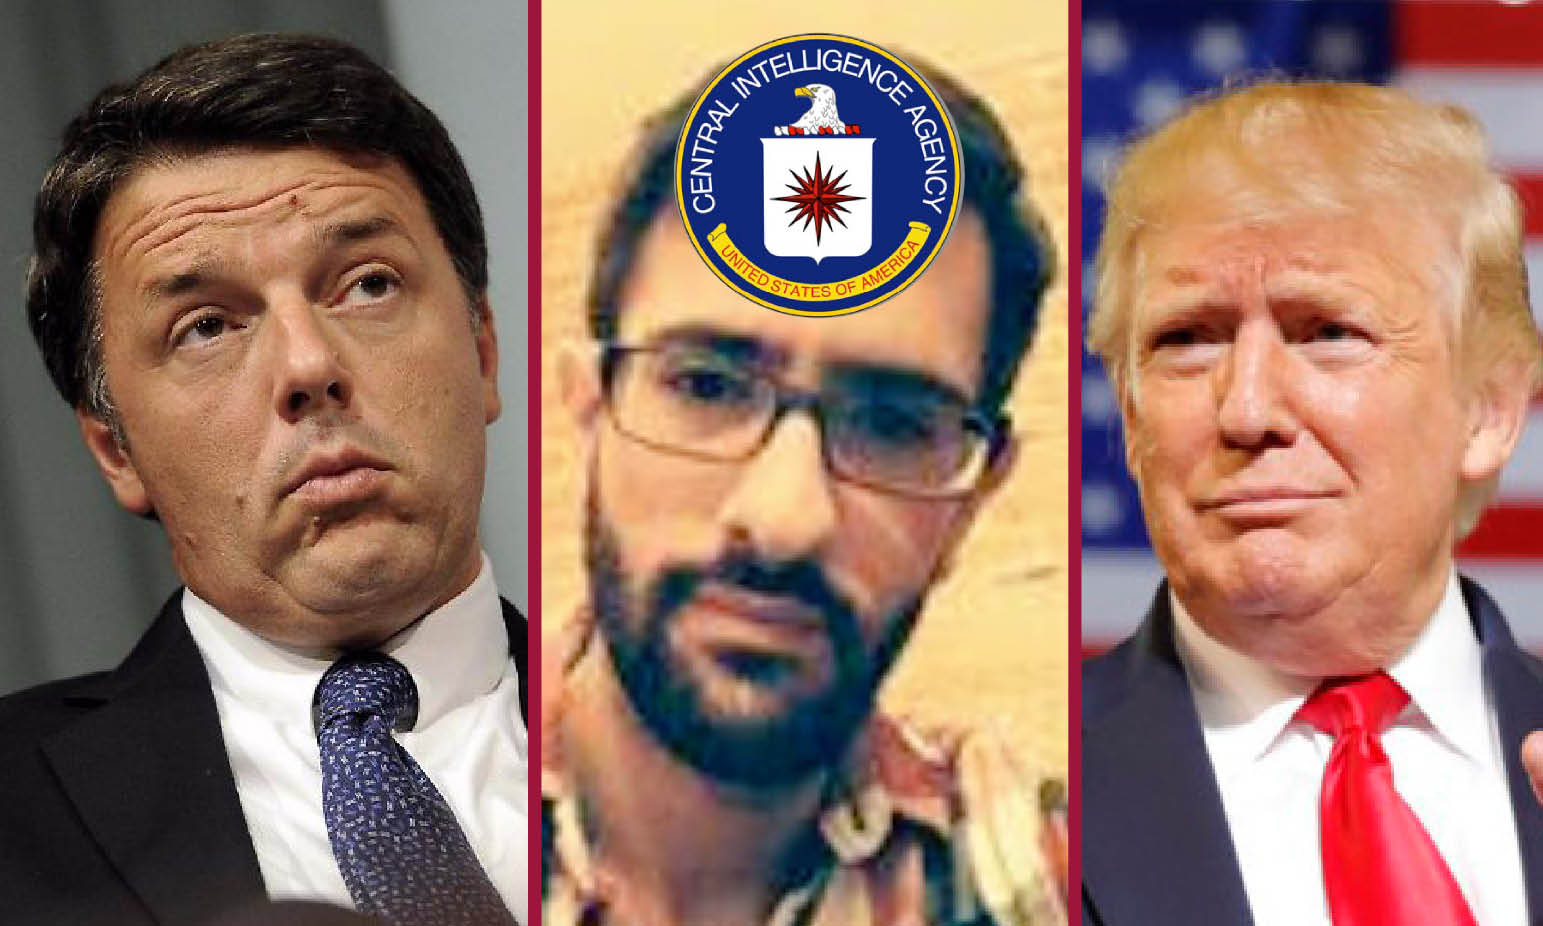 UKRAINEGATE, CIA-DEEP STATE’S PLOT AGAINST TRUMP with two whistleblowers and Italian ties